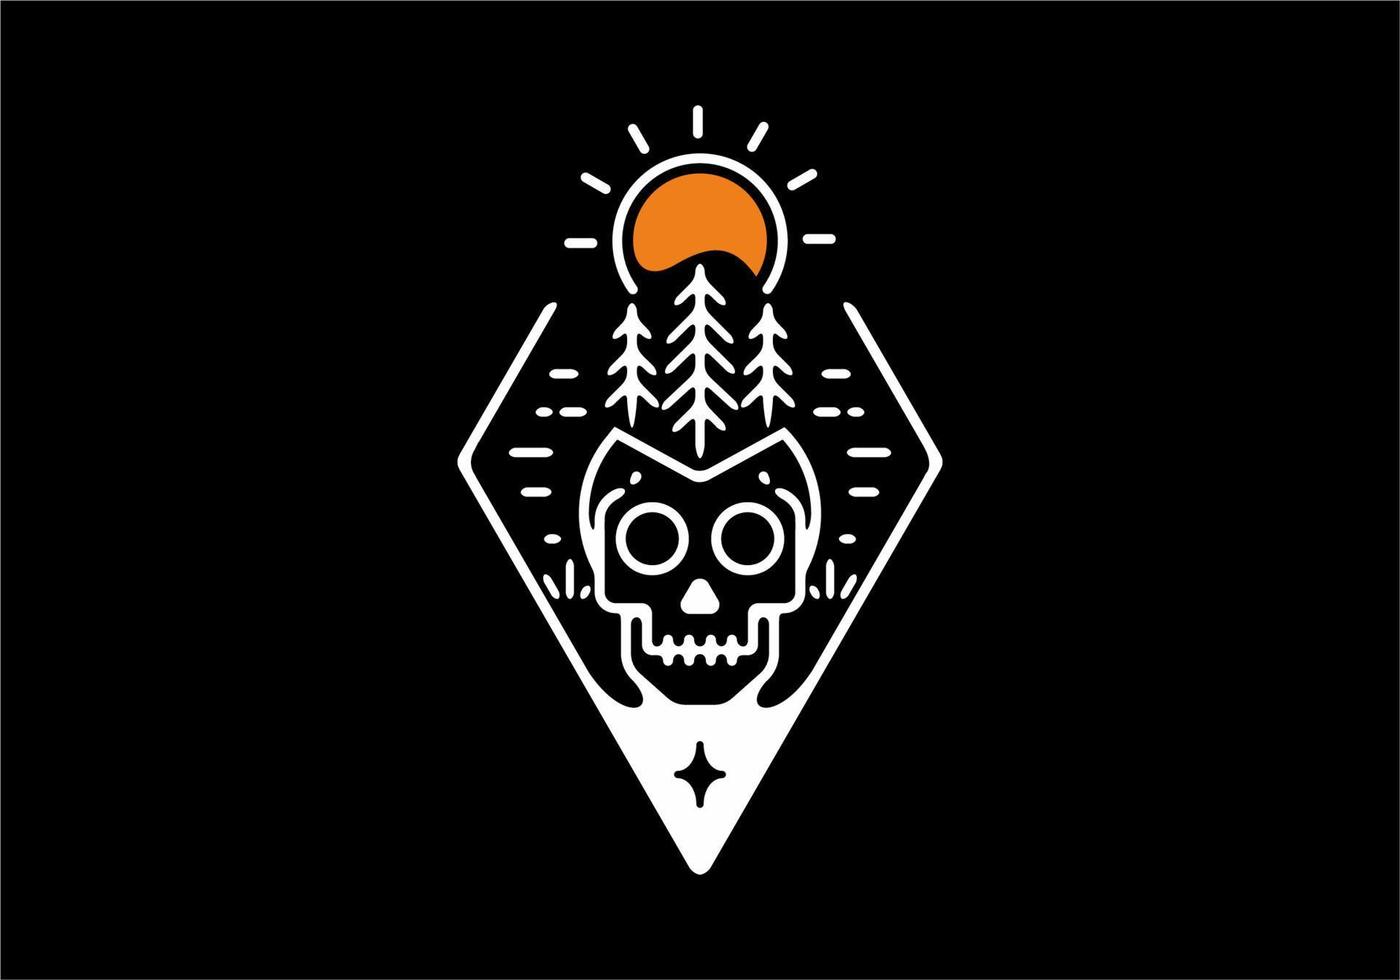 Skull and sun with pine trees line art vector